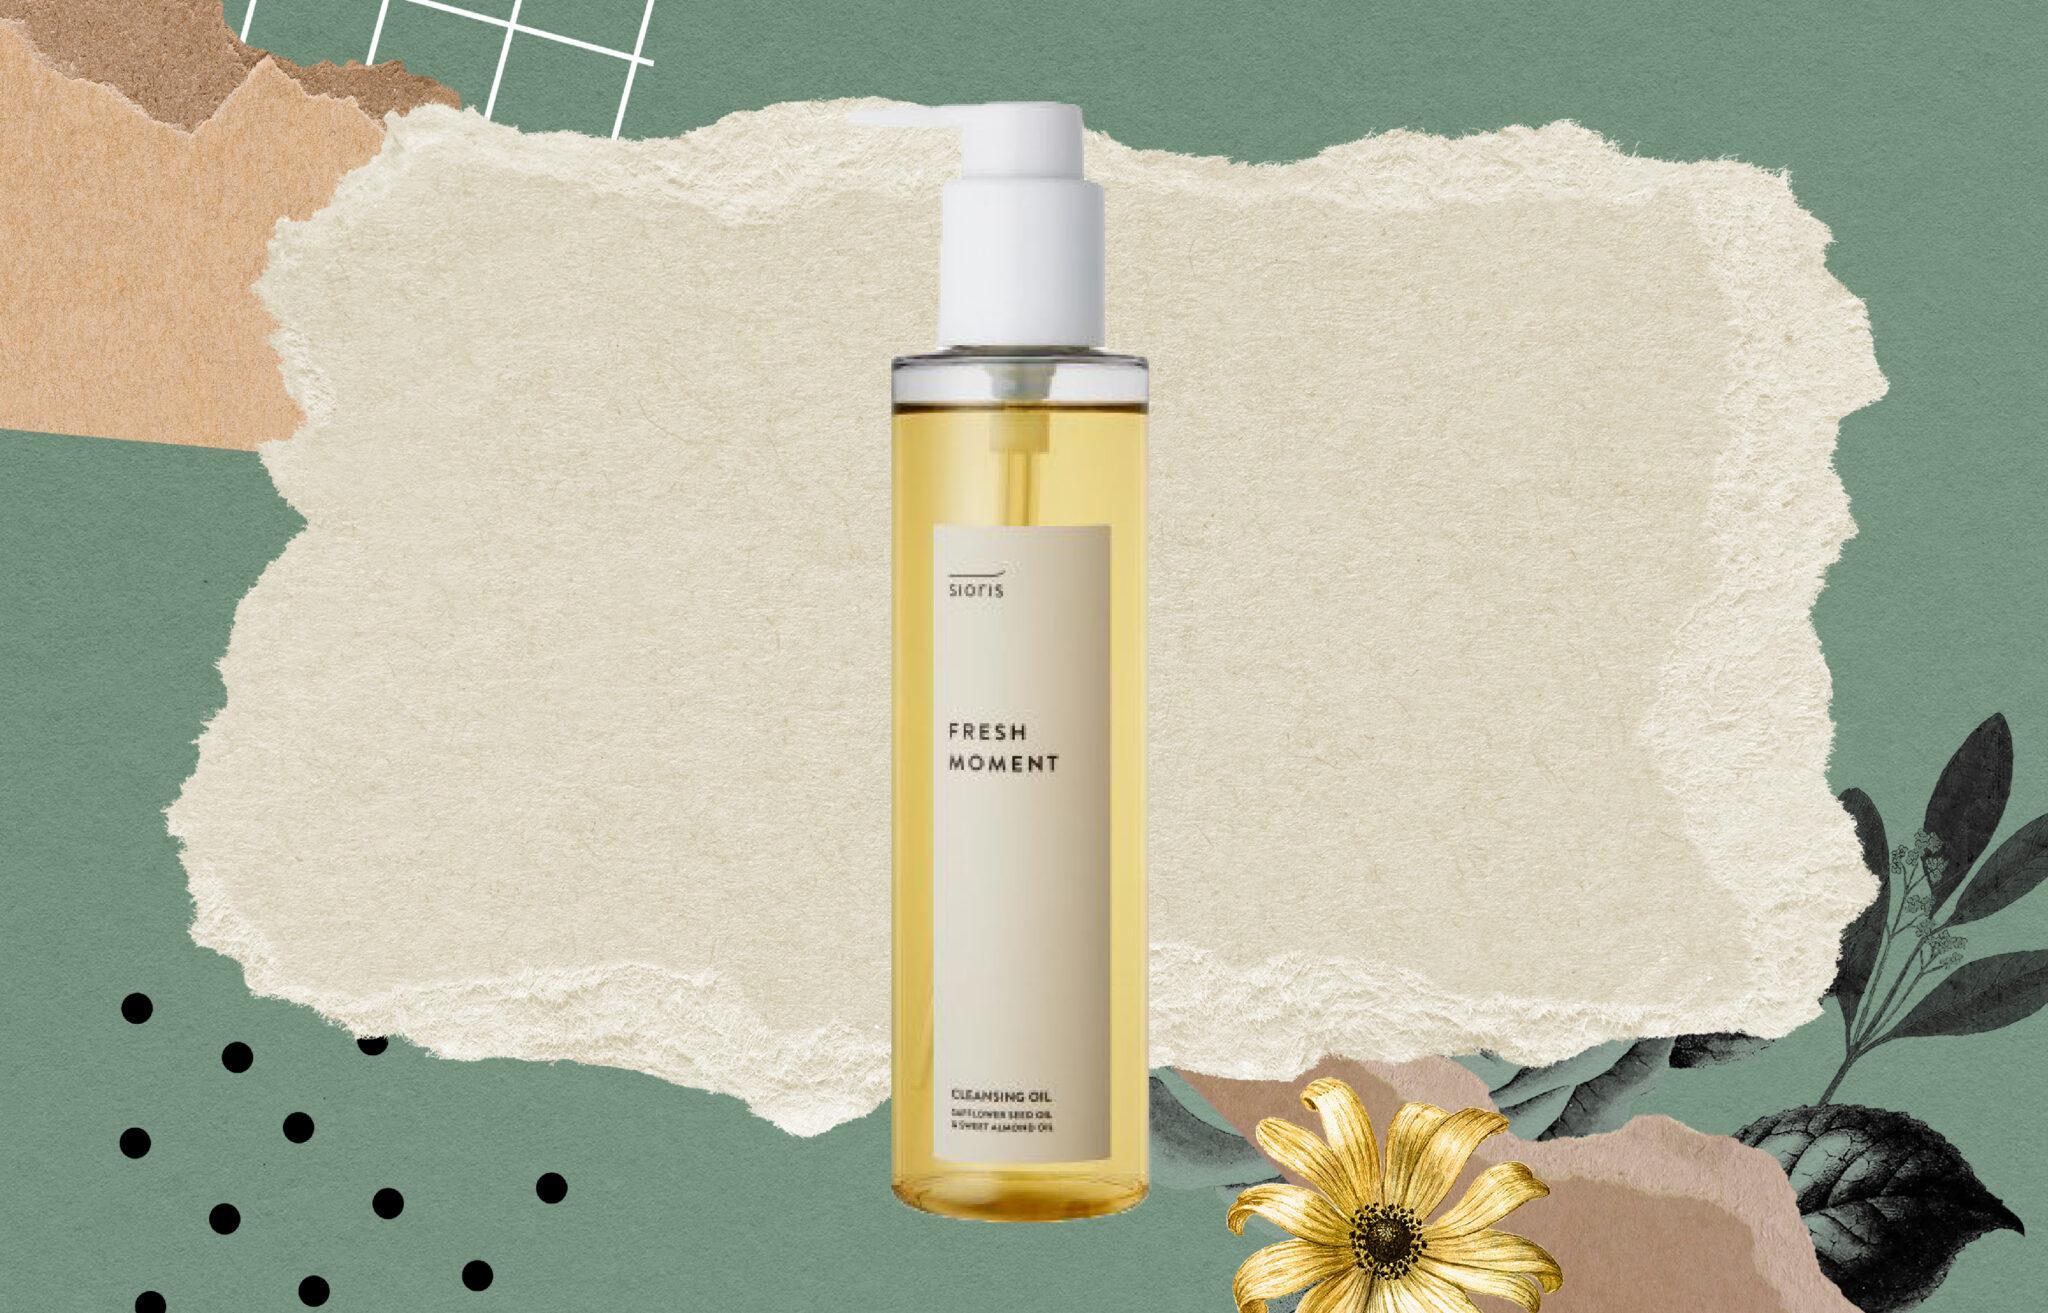 Sioris Fresh moments Cleansing oil